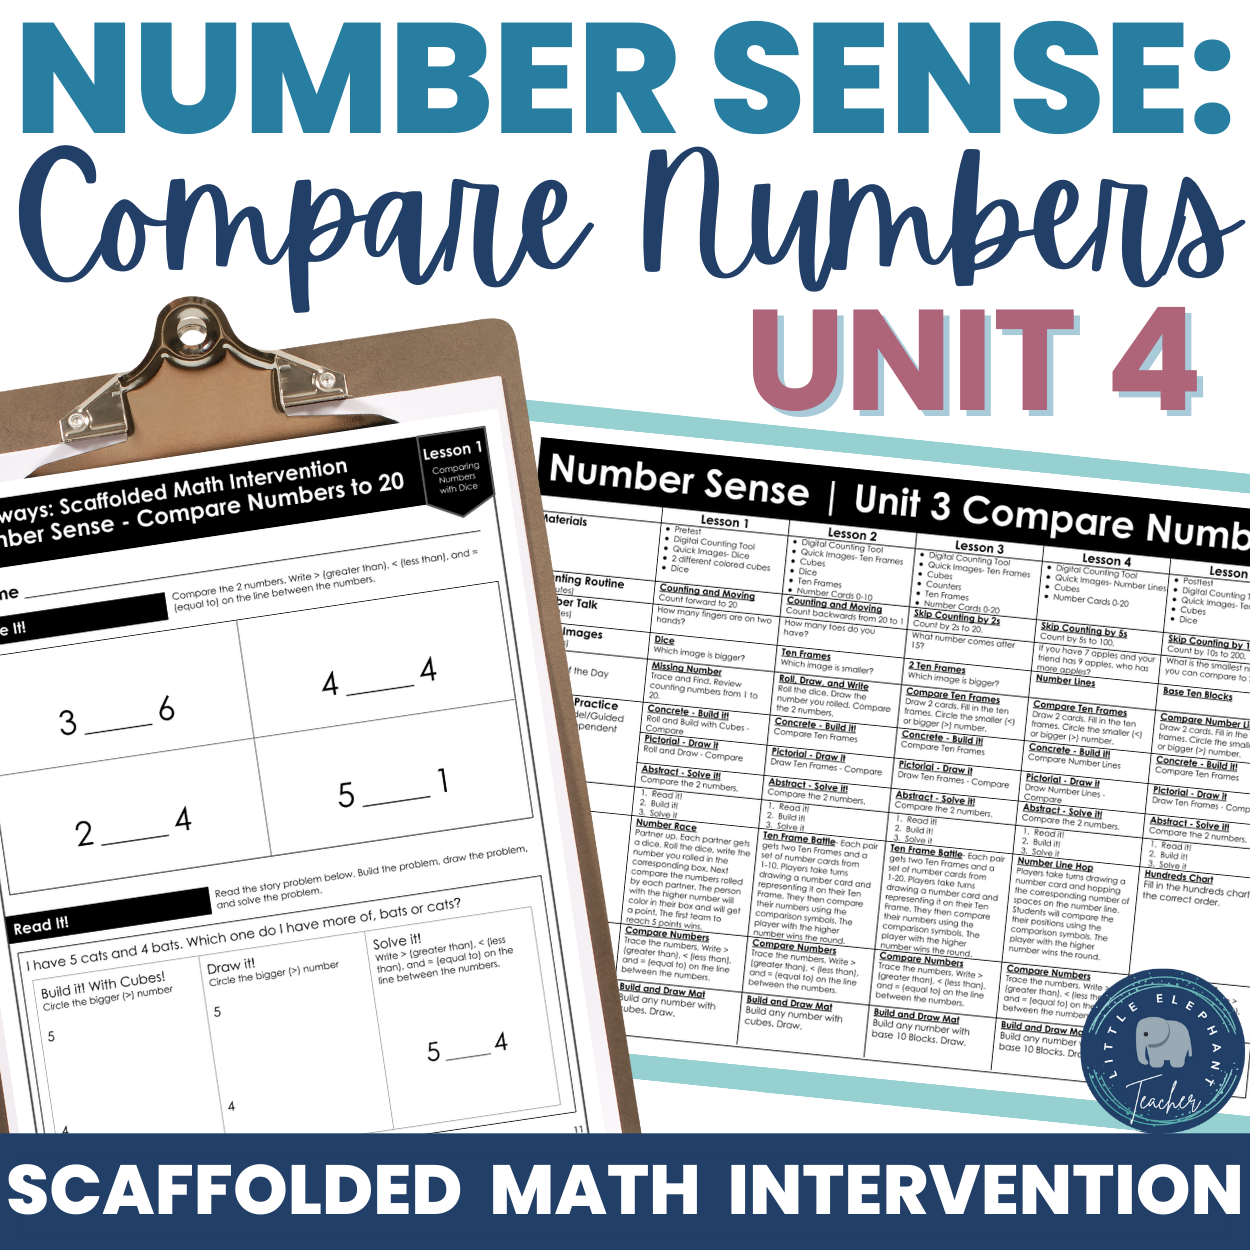 Unit 4: Compare Numbers